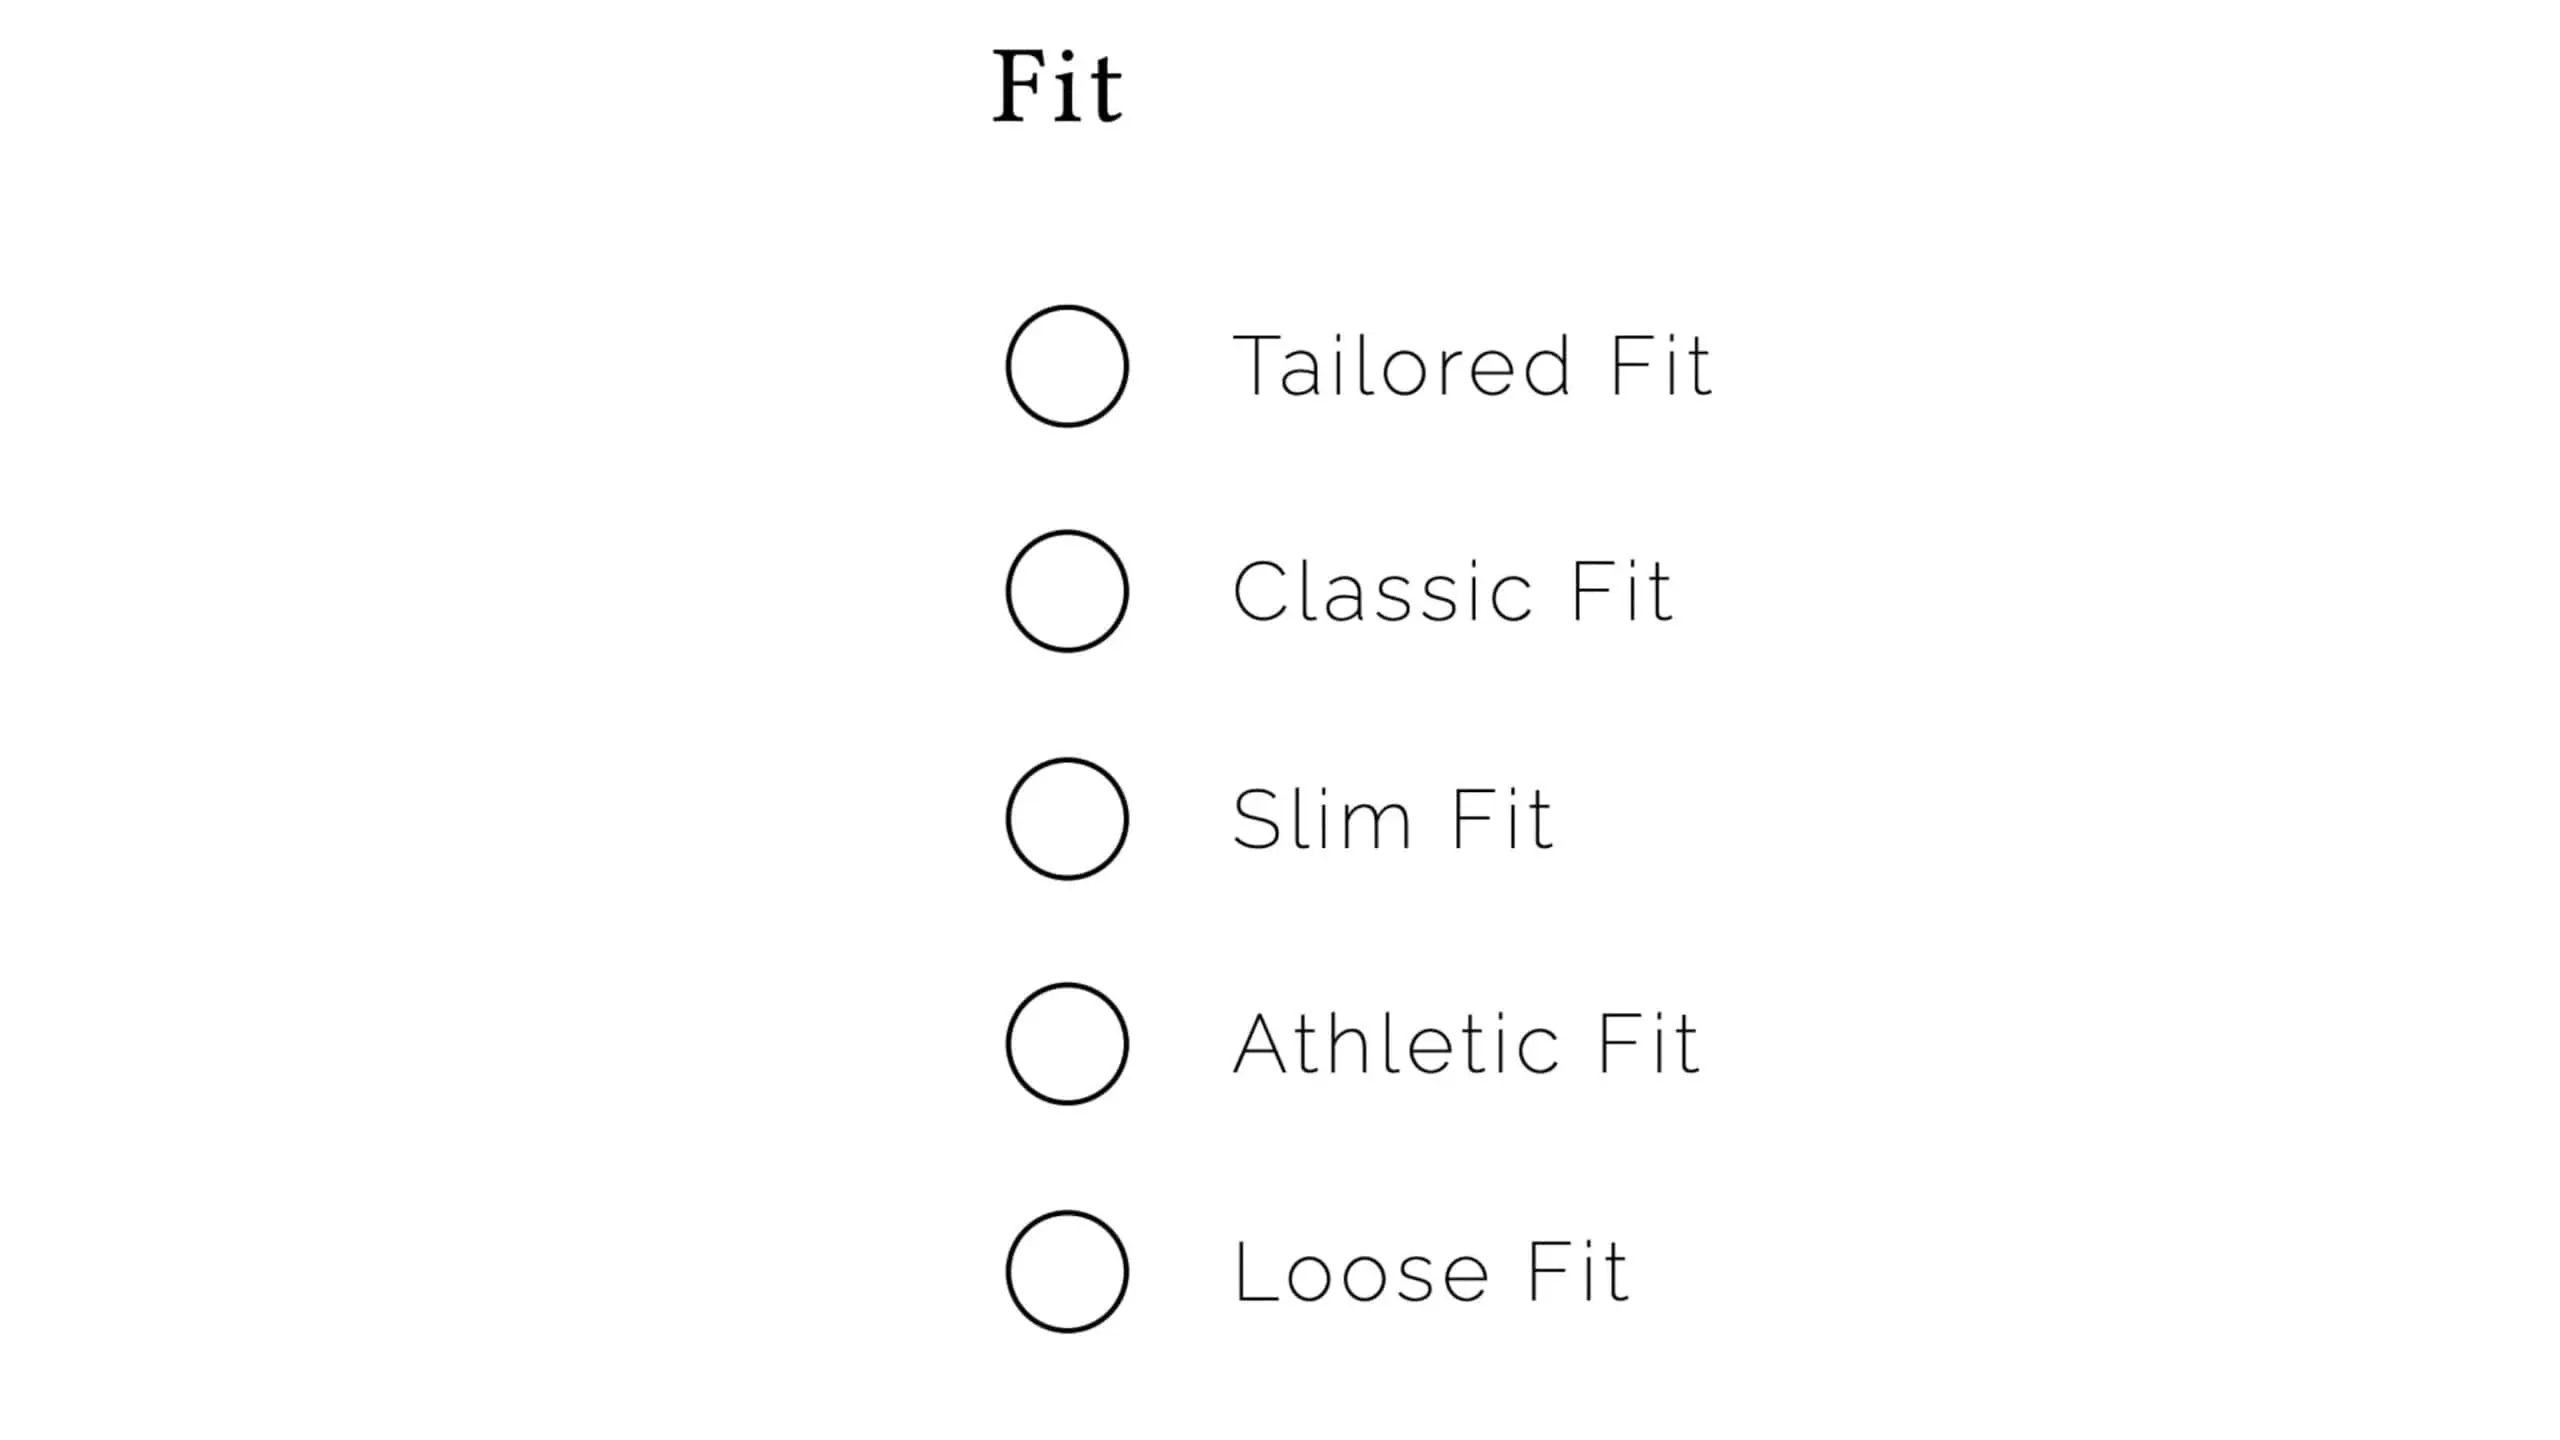 Types of fit they offer